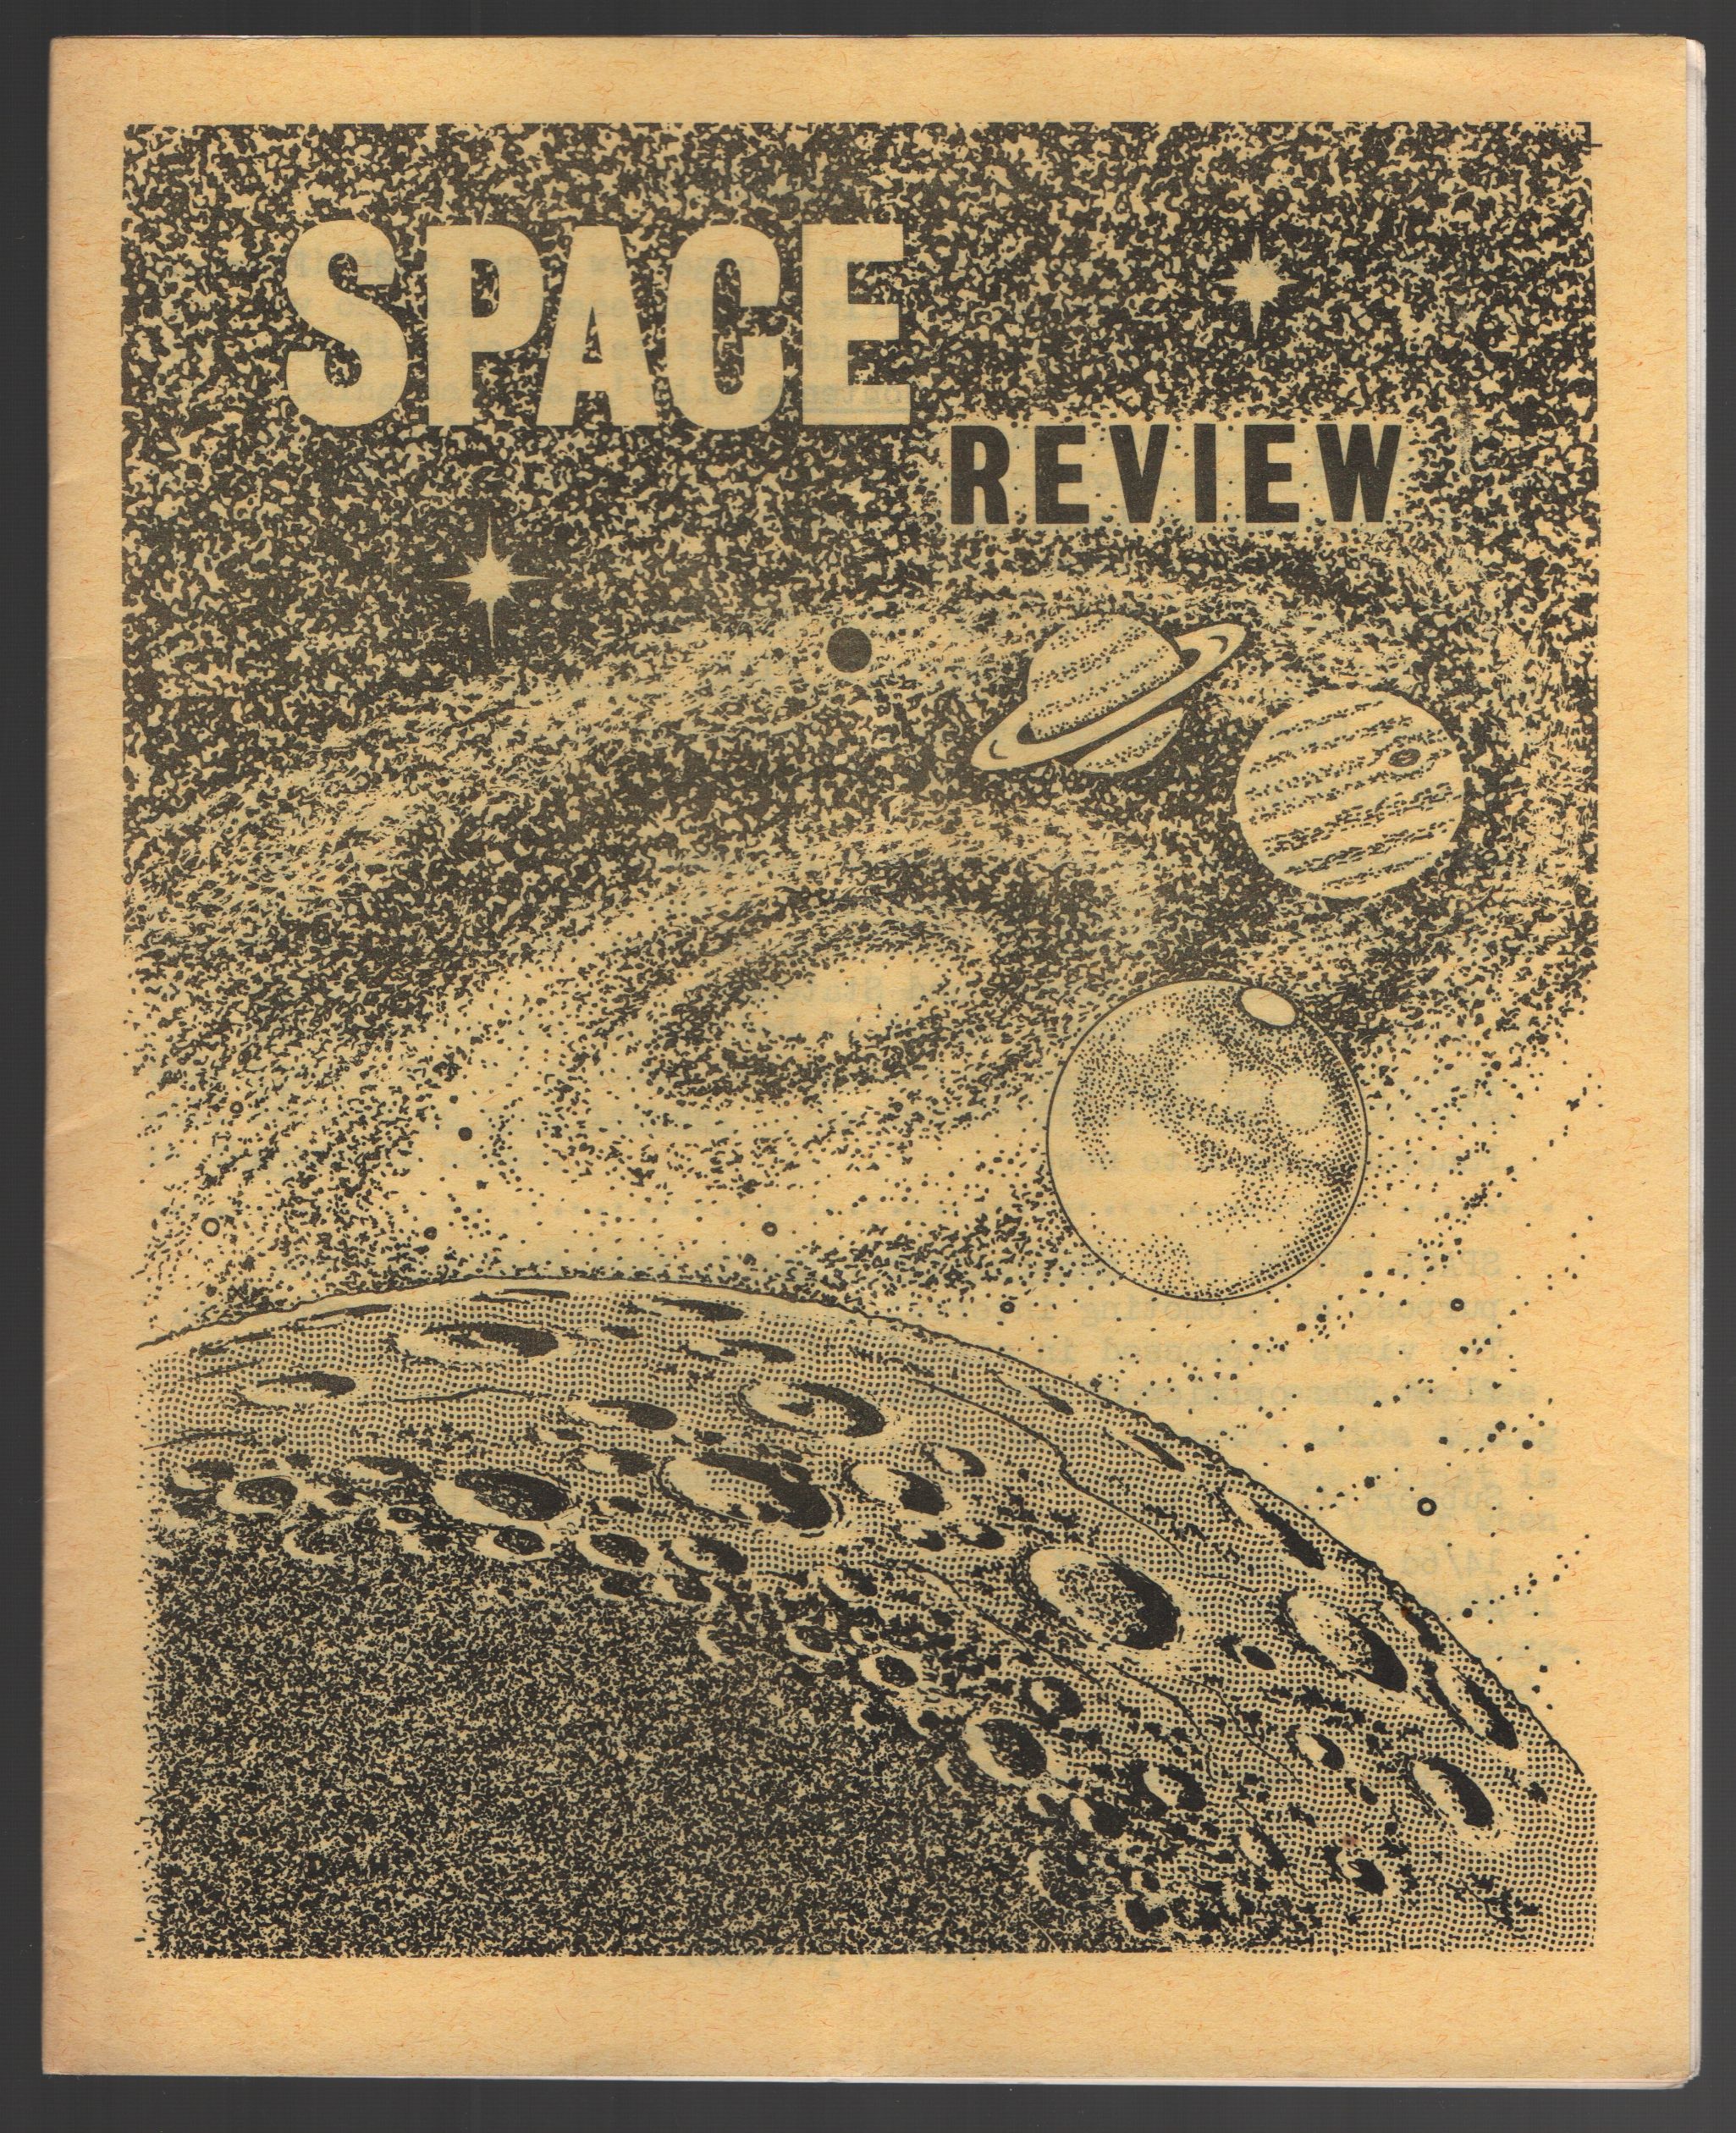 Space Review Volume 2 No. 1 1963 February by Space Review) [Miss S. R ...